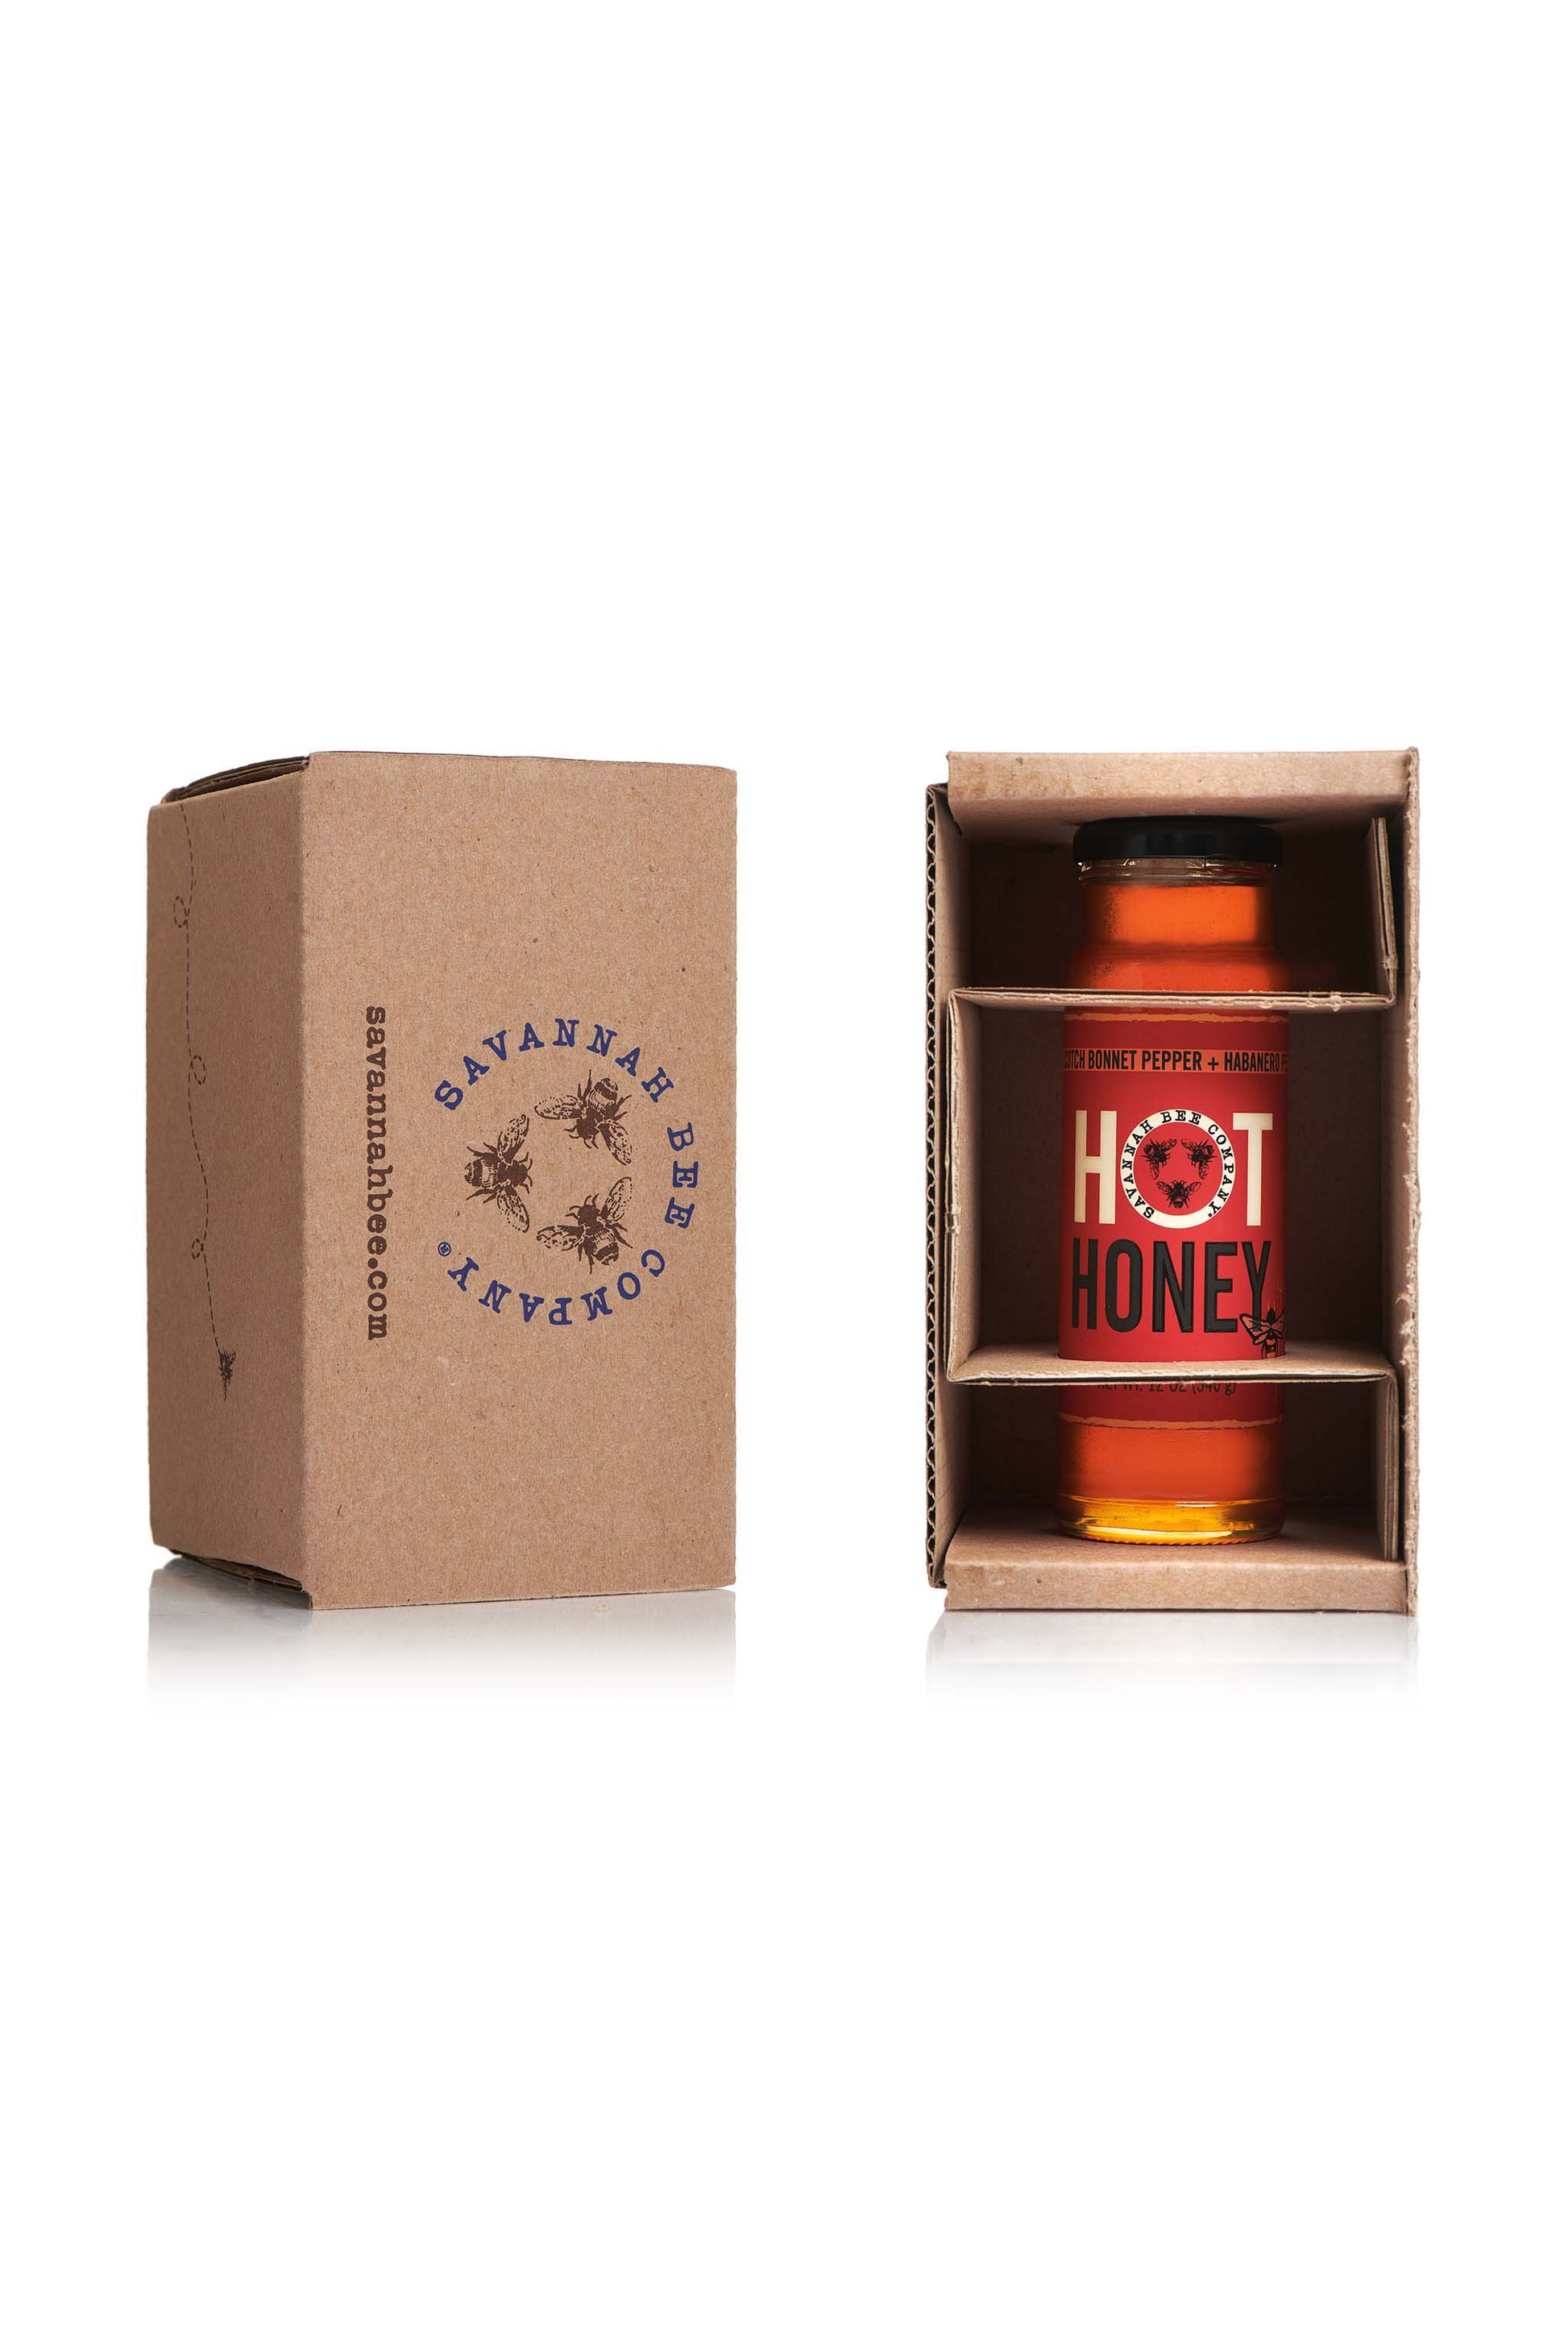 Hot Honey 12 oz. tower in a gift box